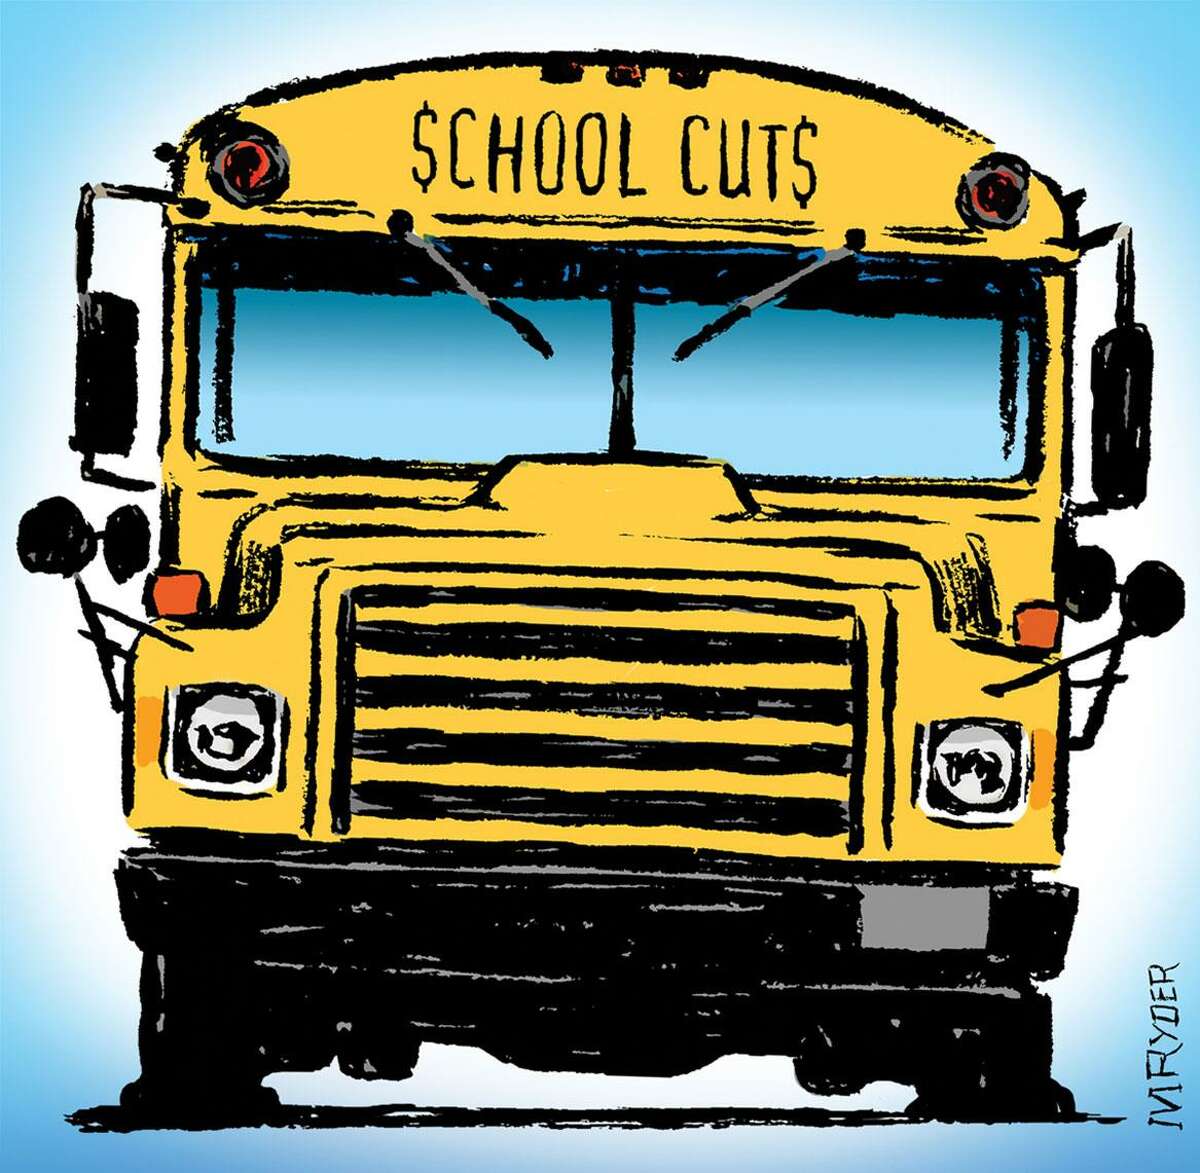 This artwork by M. Ryder relates to cuts in funding for public schools.